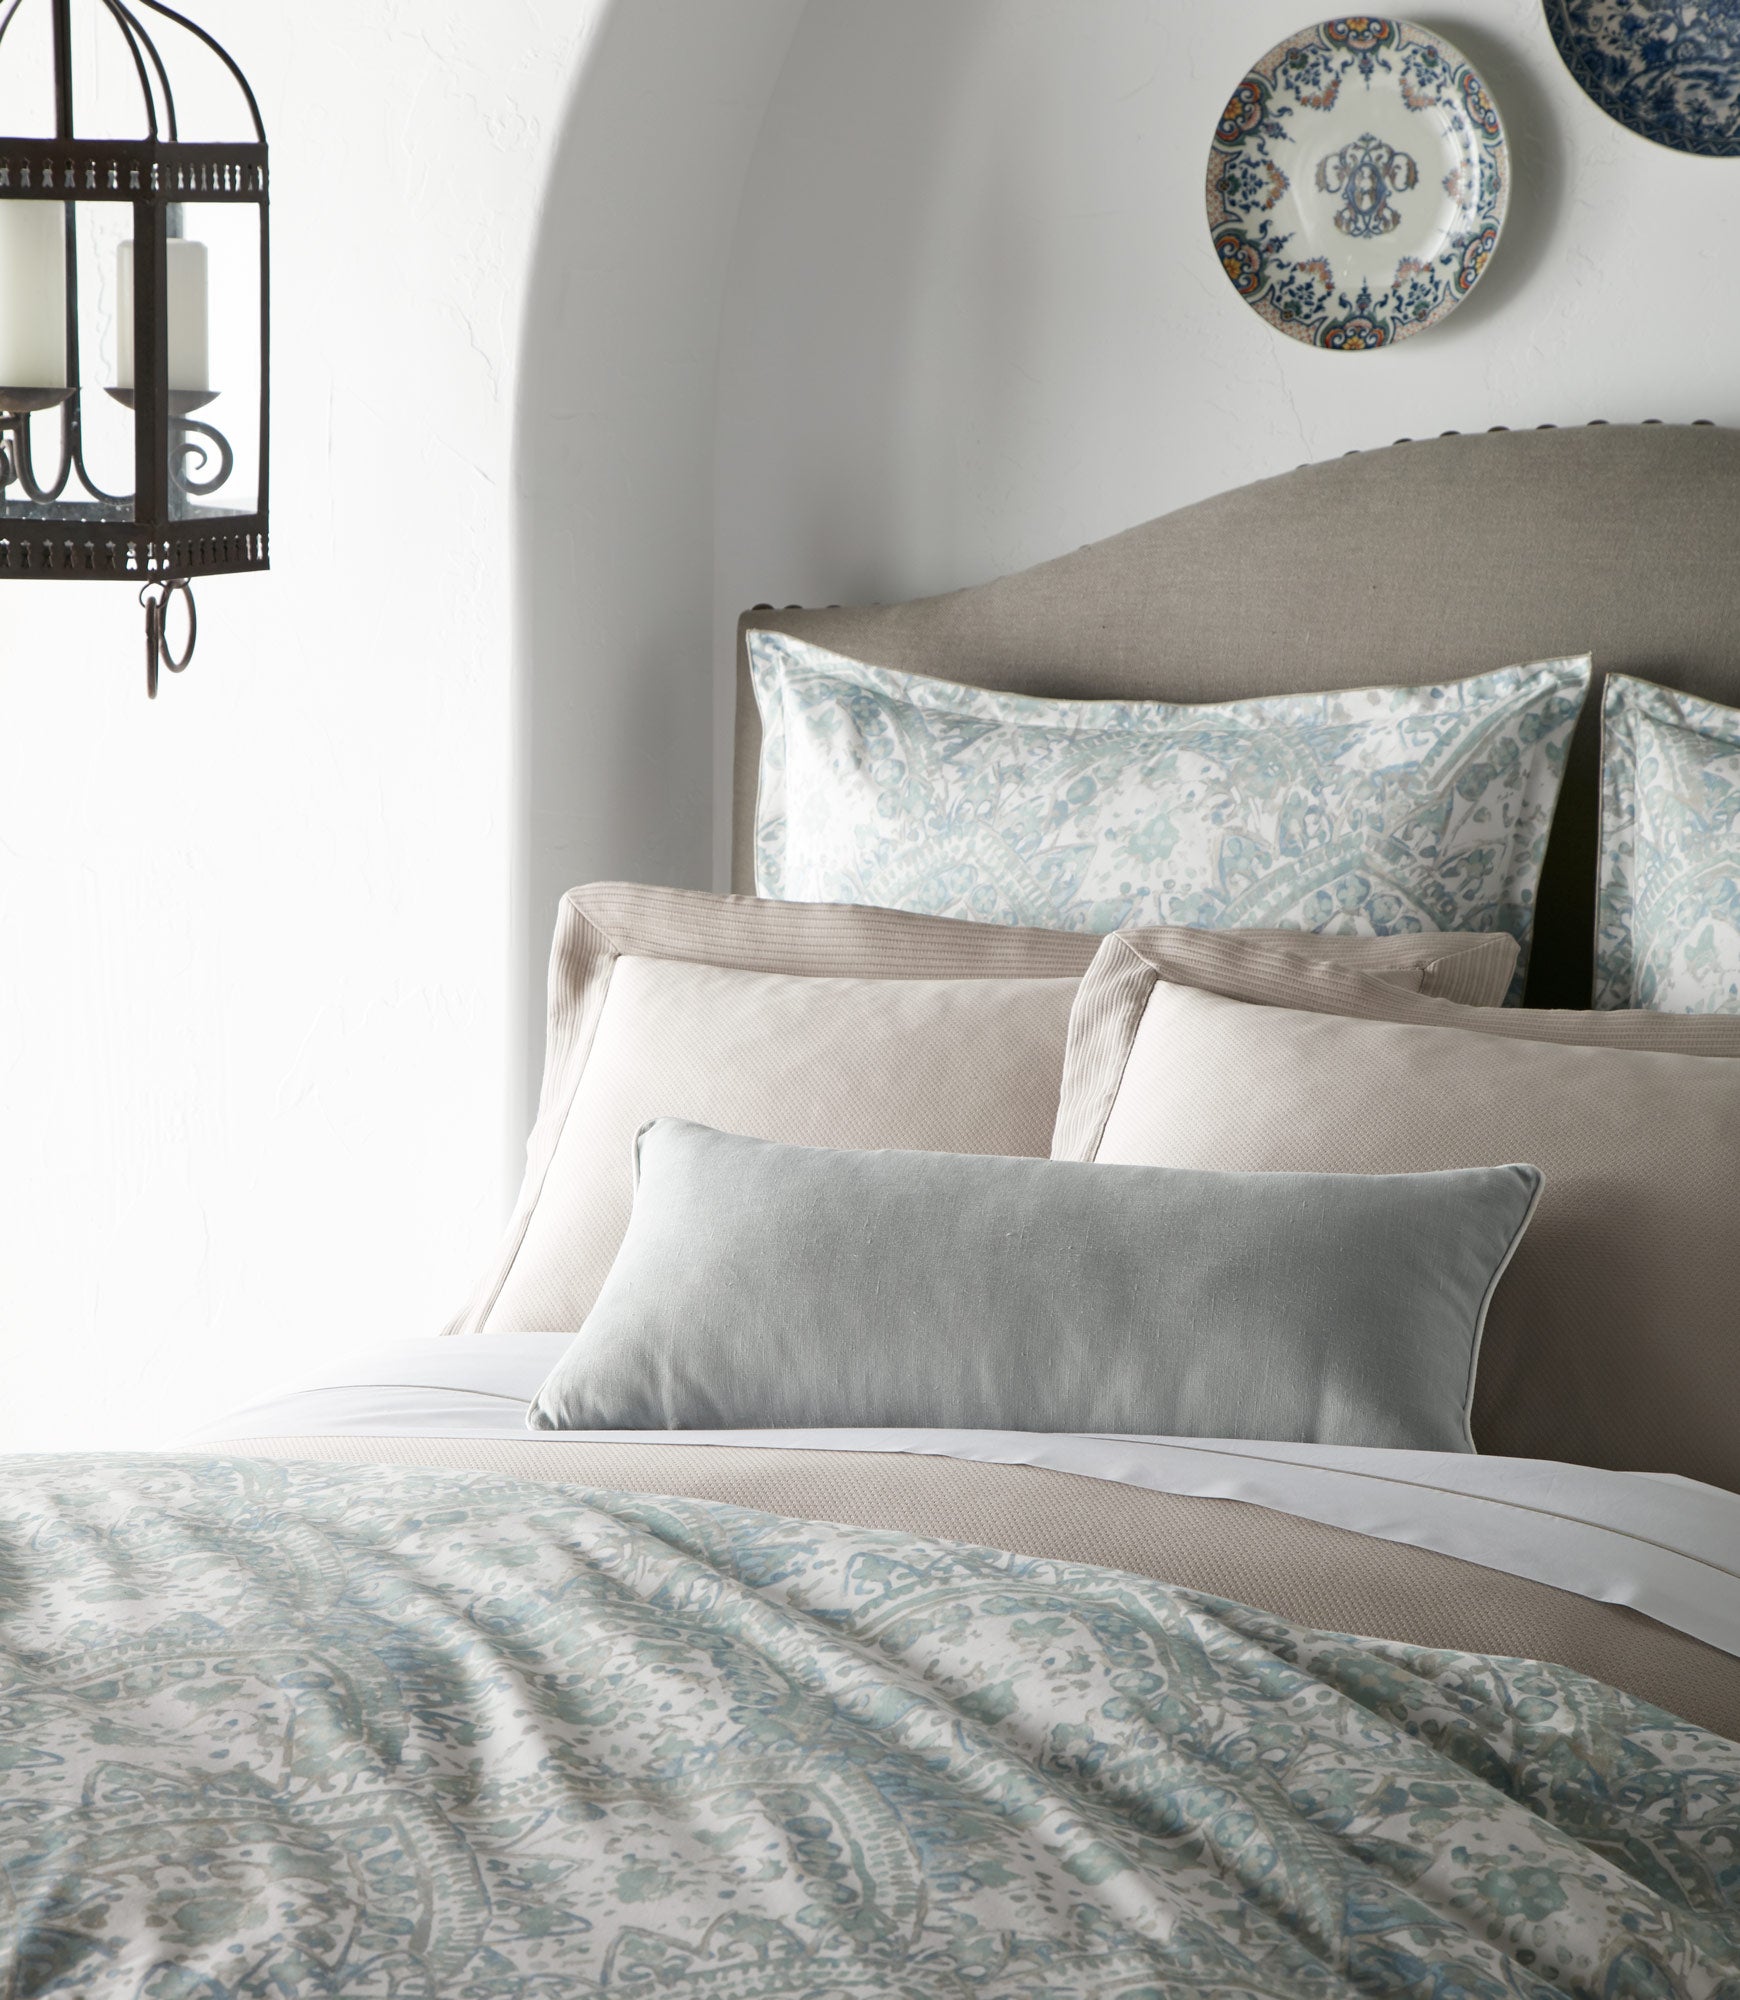 Seville Percale Duvet Cover and Shams in Bedroom Mineral